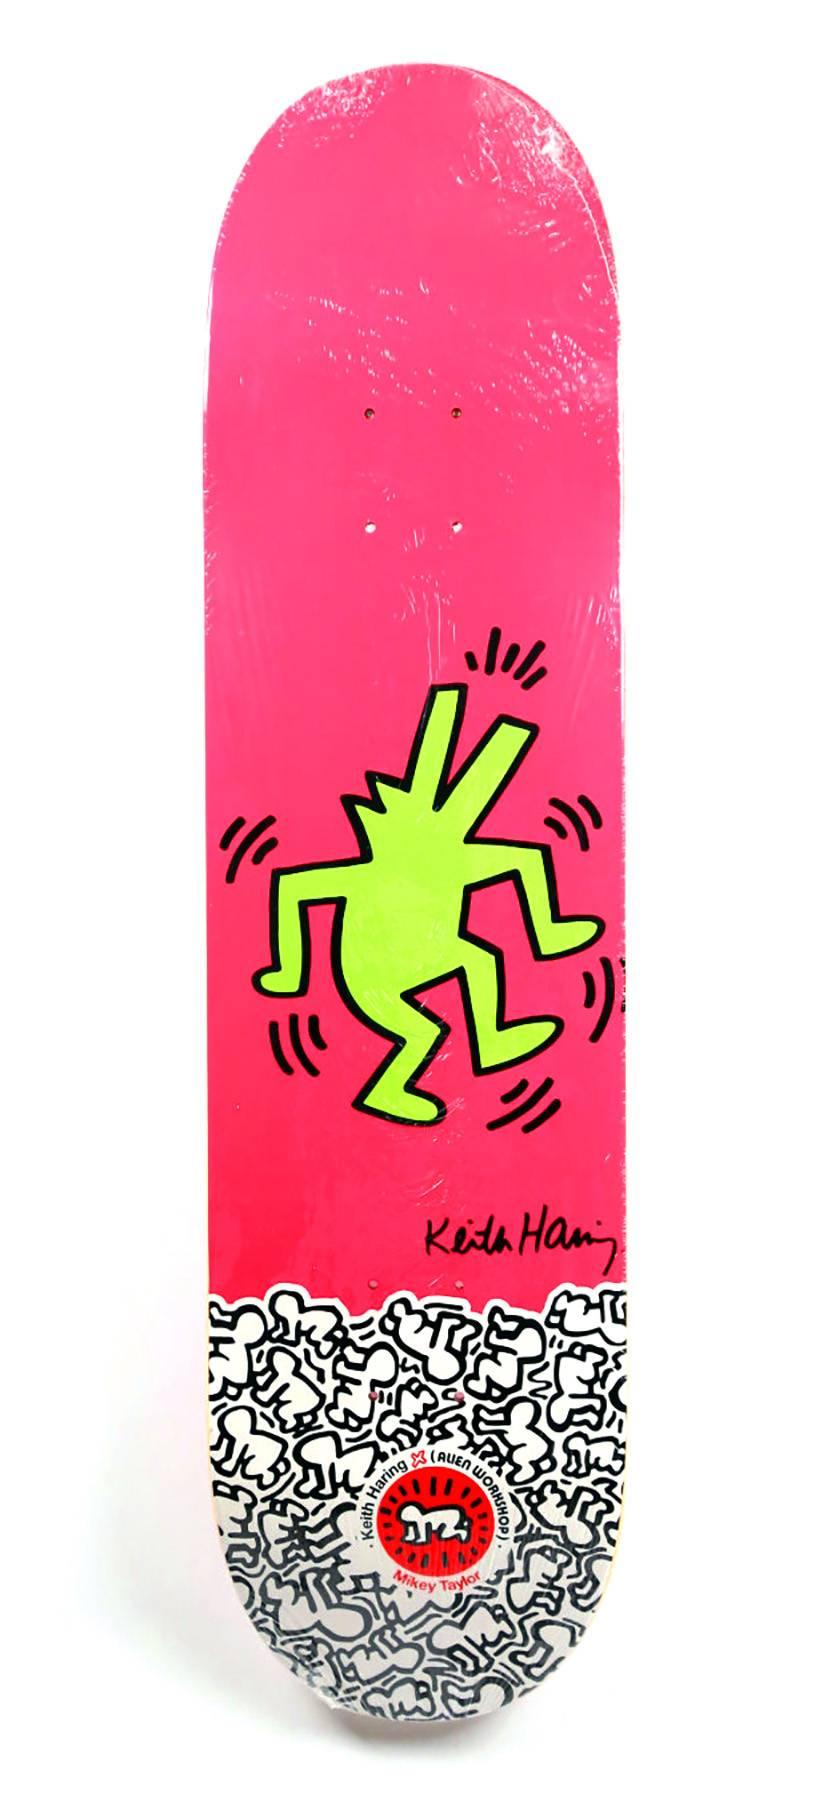 Keith Haring Crocodile Skateboard Deck  - Print by (after) Keith Haring